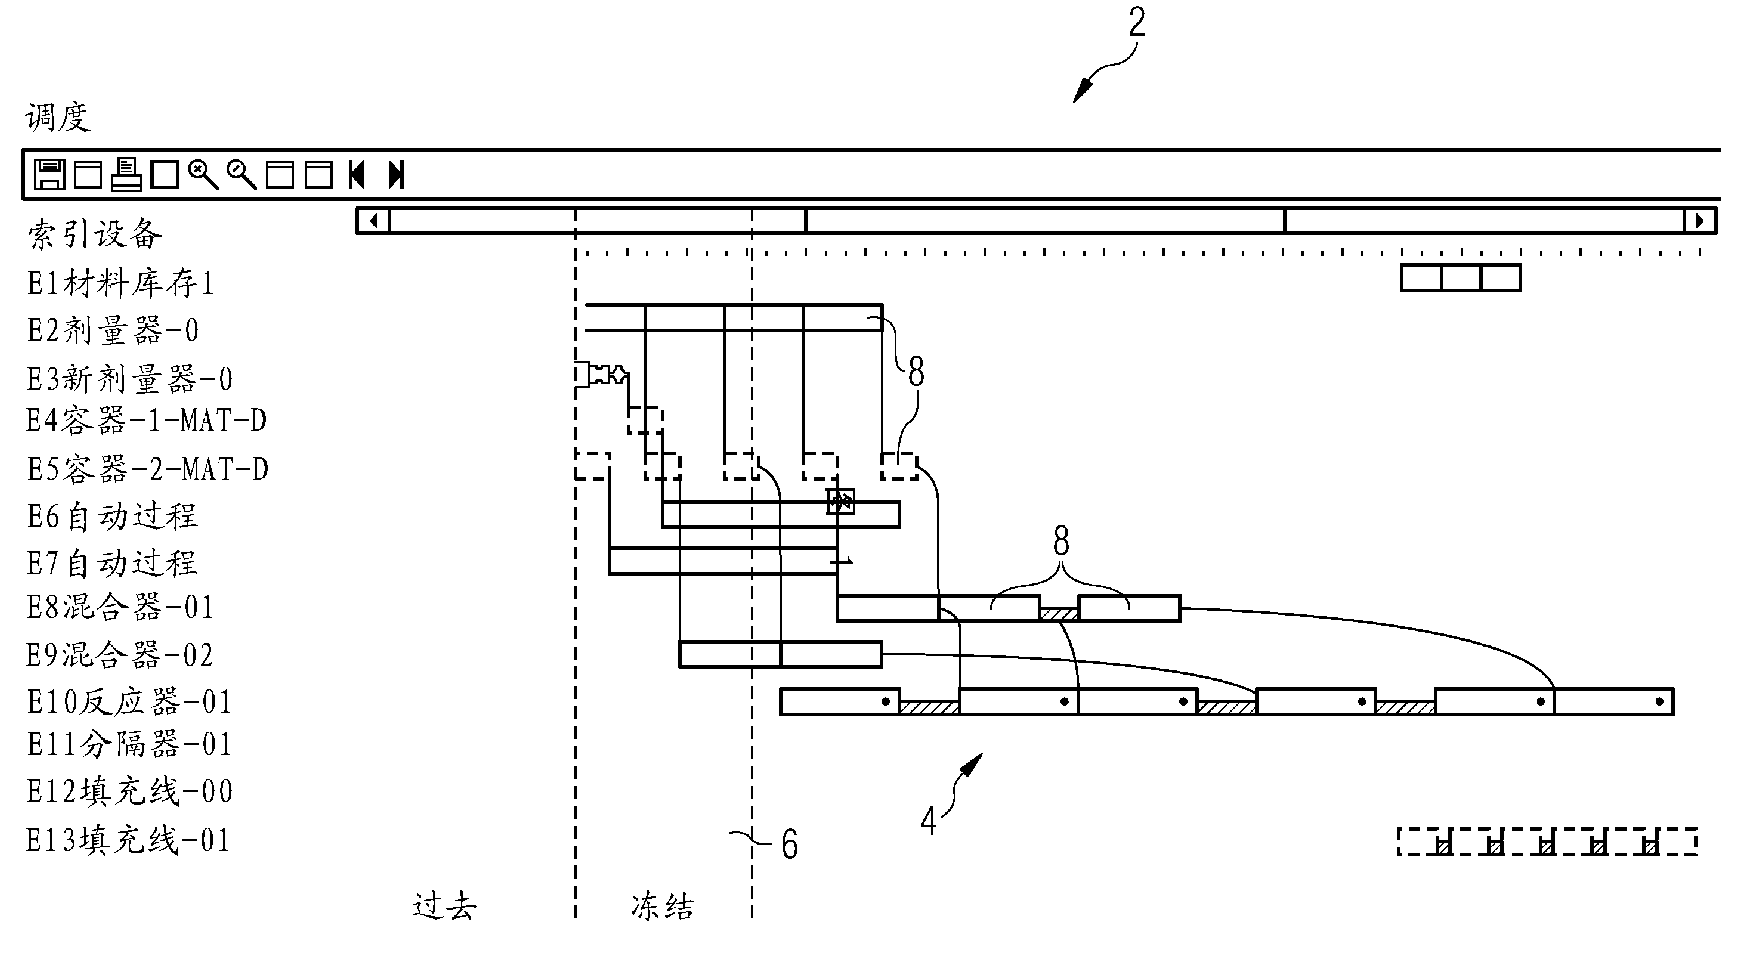 A method and a system for executing a scheduled production process